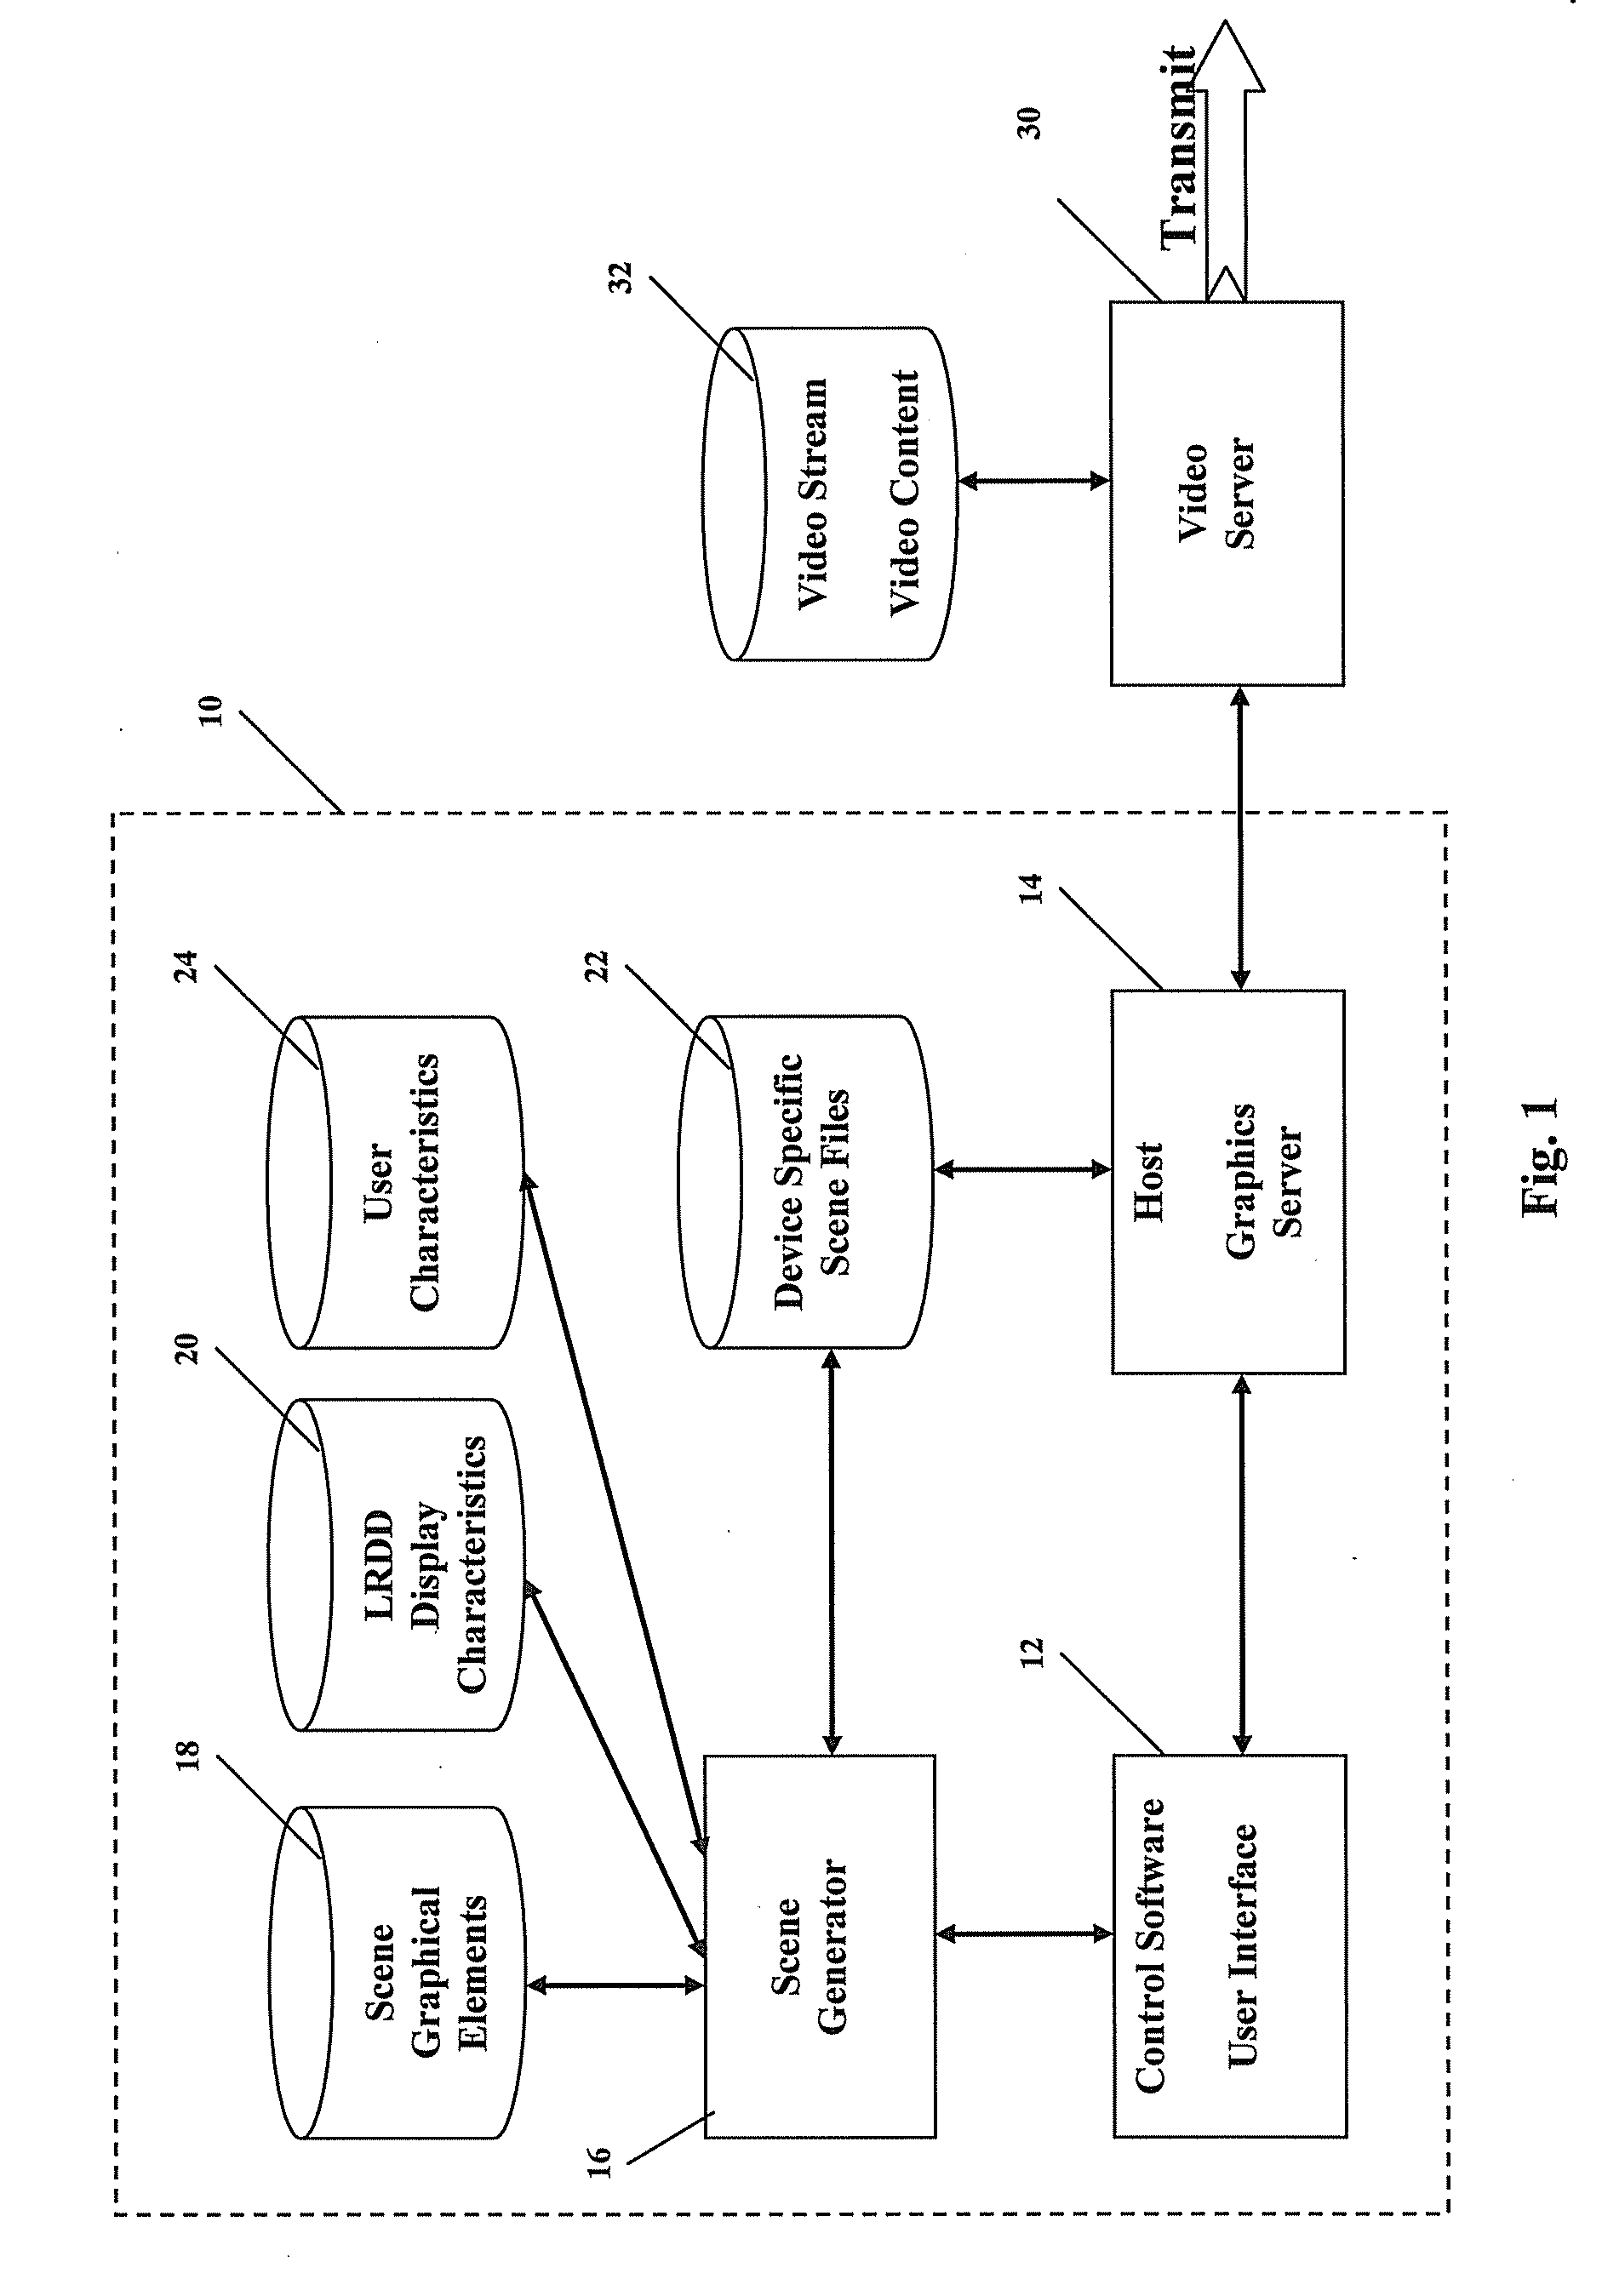 Compact graphics for limited resolution display devices